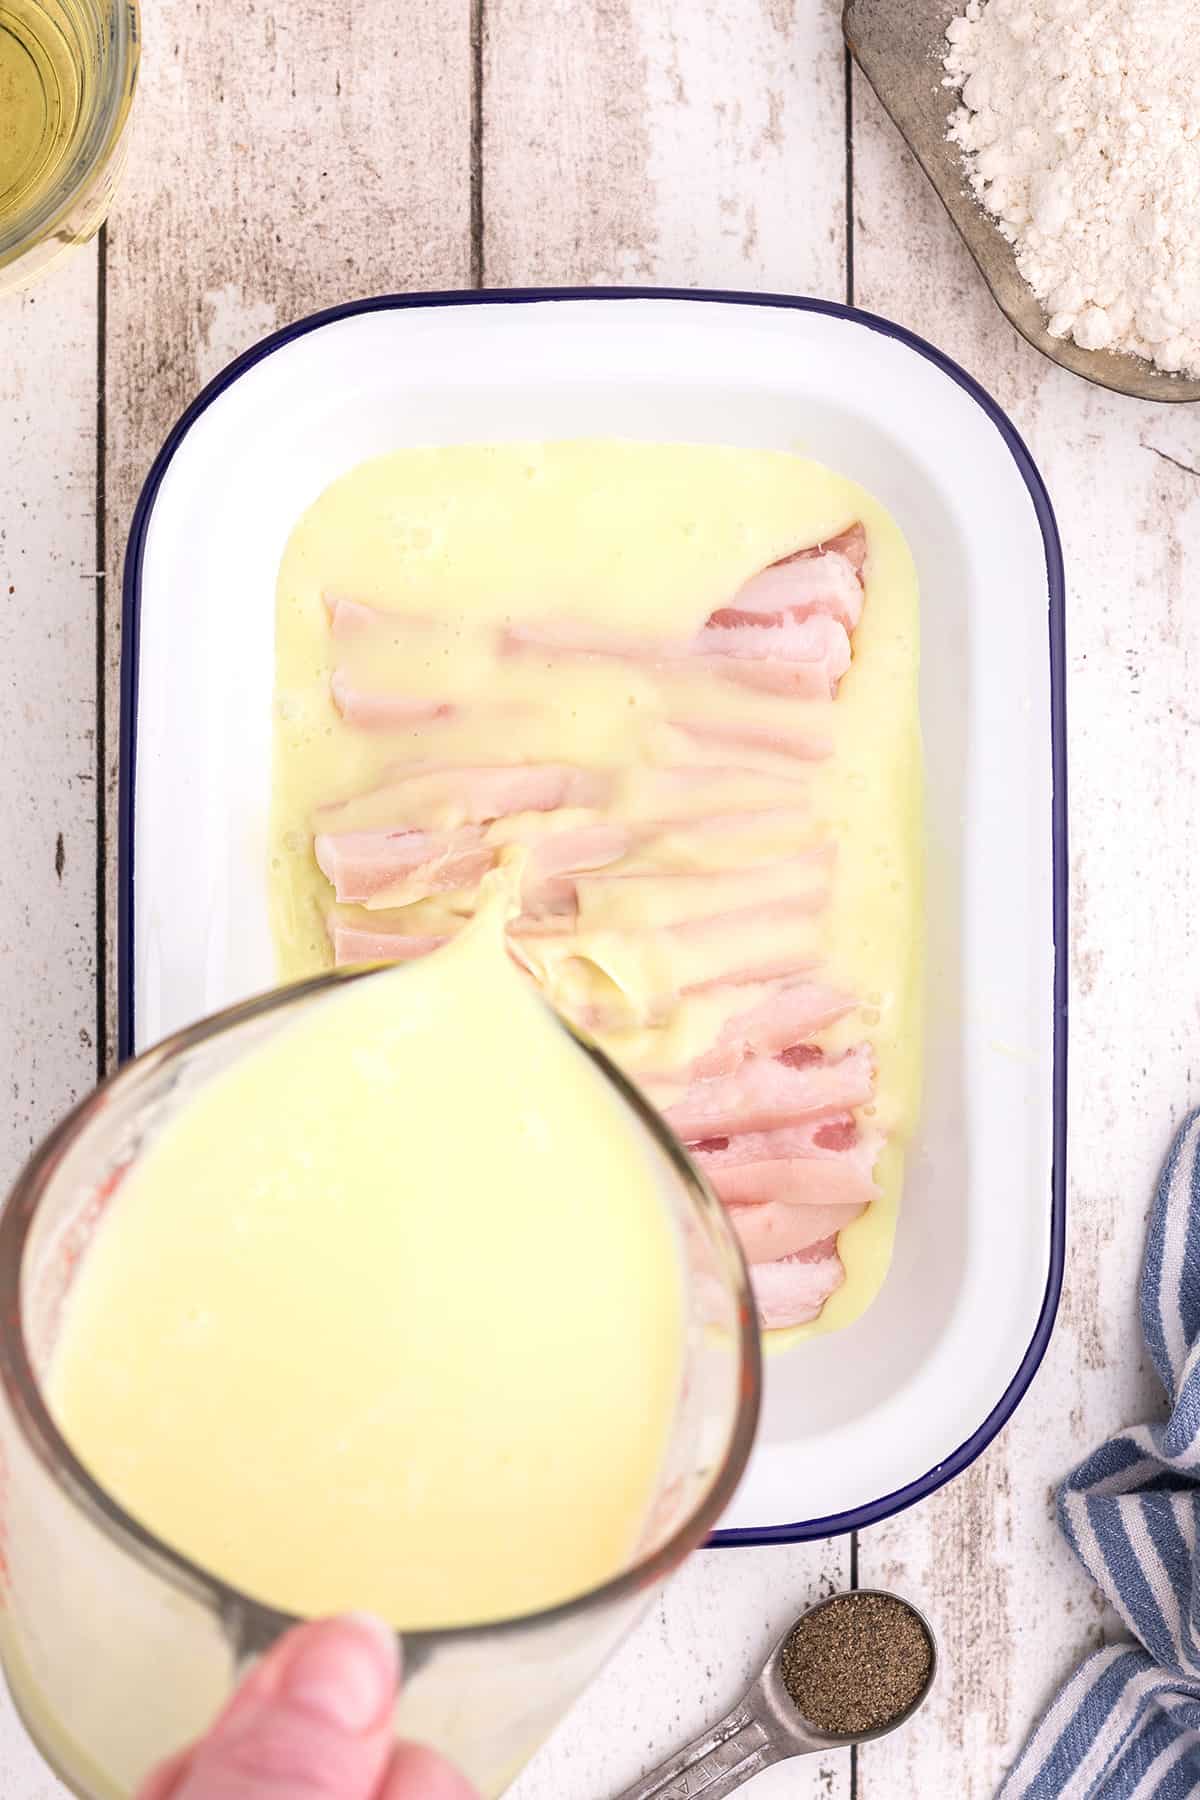 Slices of salt pork soaking in a pan covered in buttermilk.